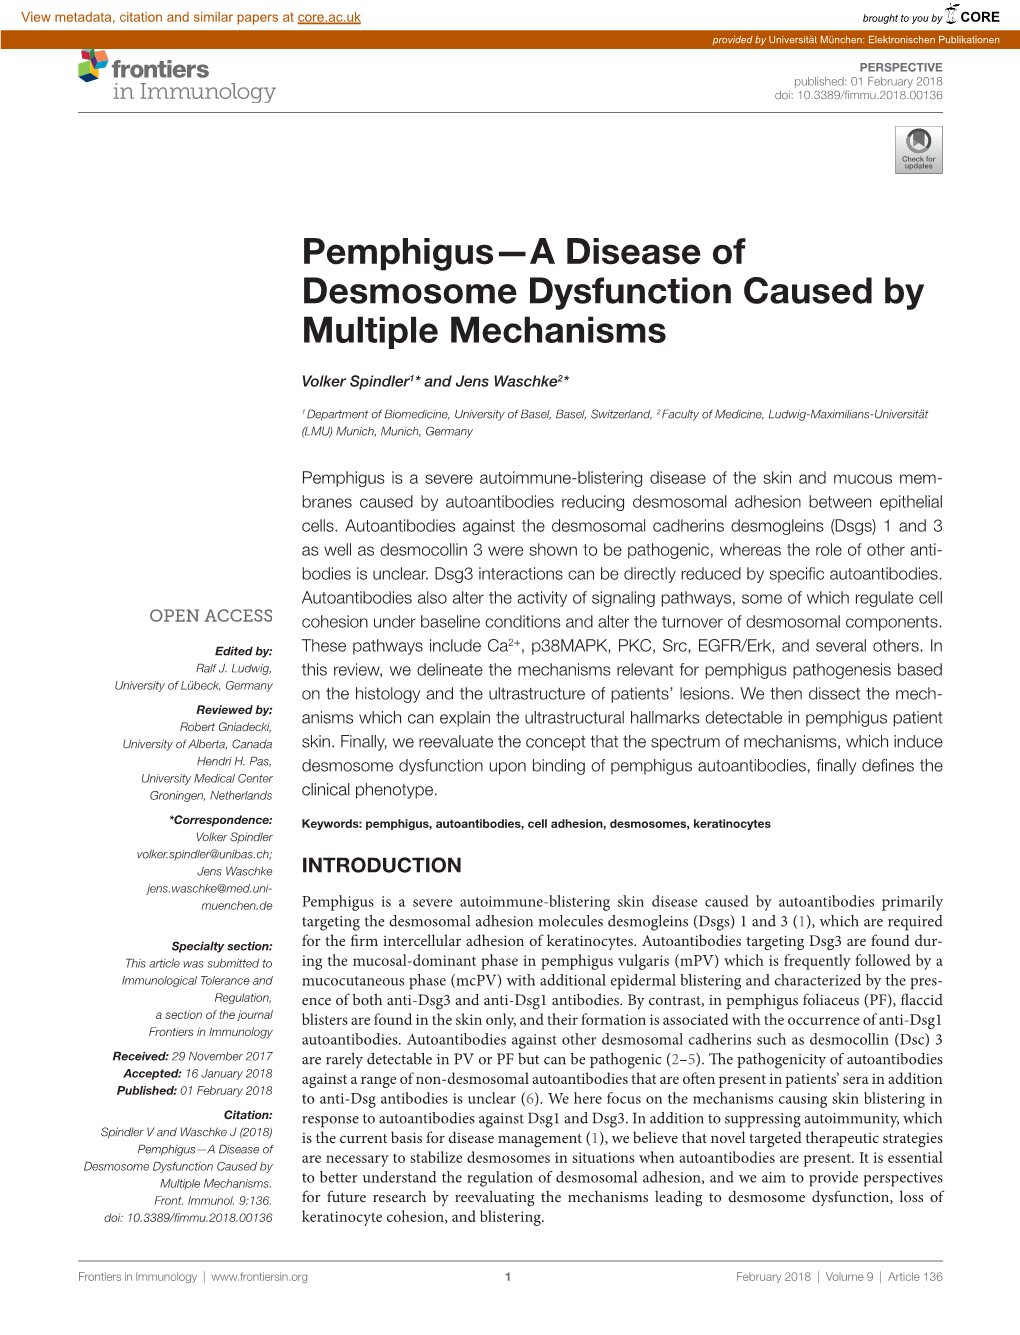 Pemphigus—A Disease of Desmosome Dysfunction Caused by Multiple Mechanisms